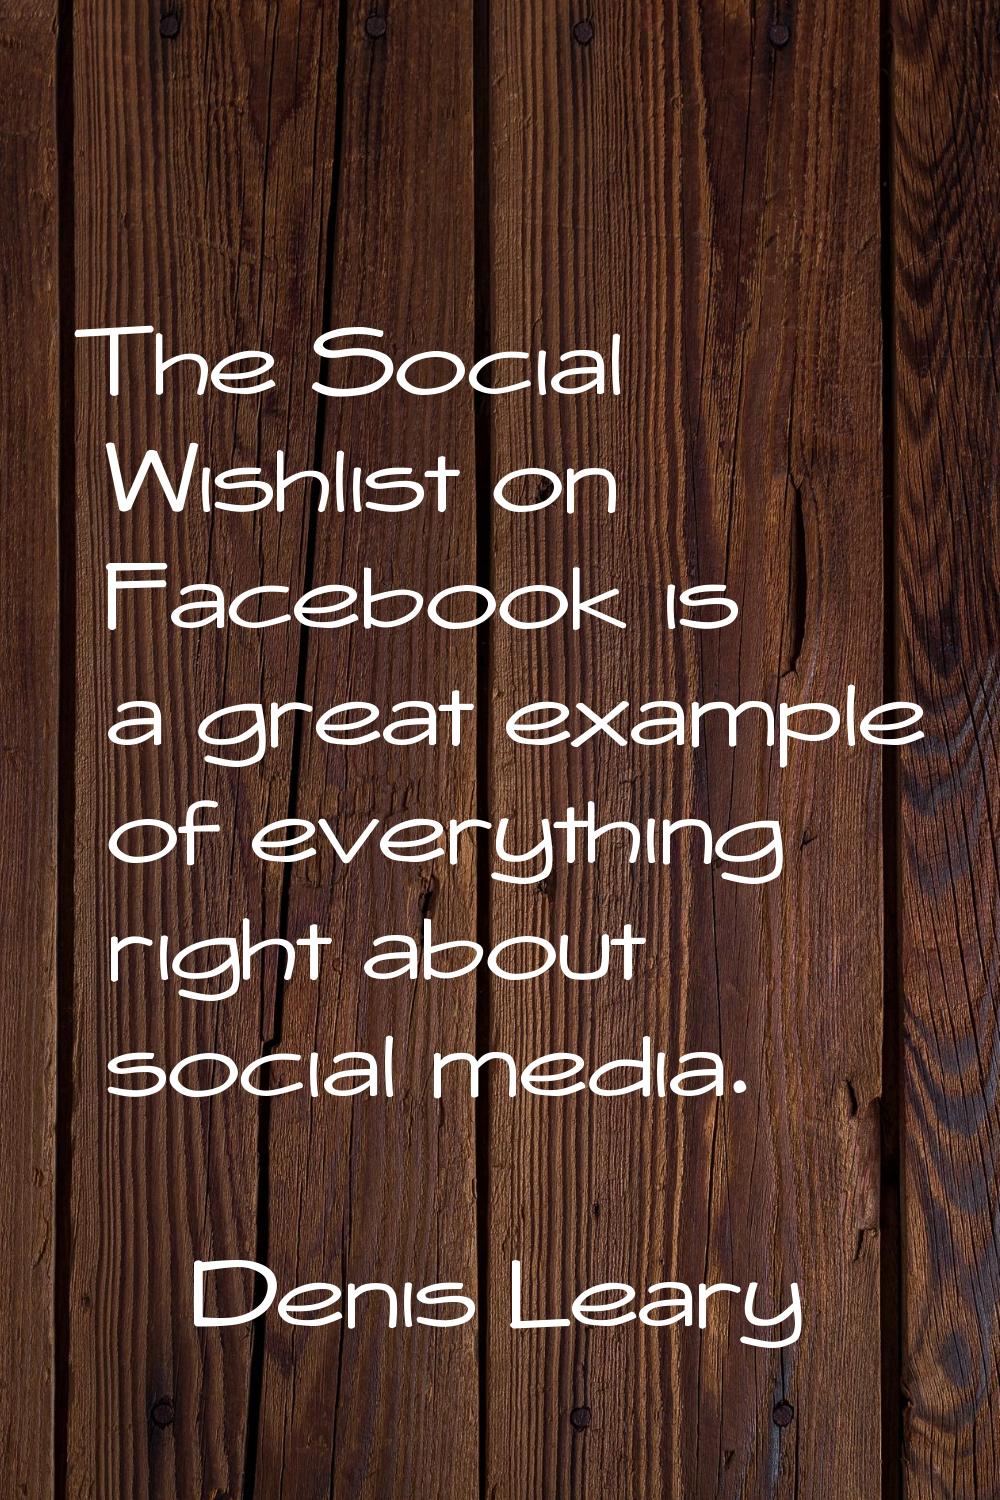 The Social Wishlist on Facebook is a great example of everything right about social media.